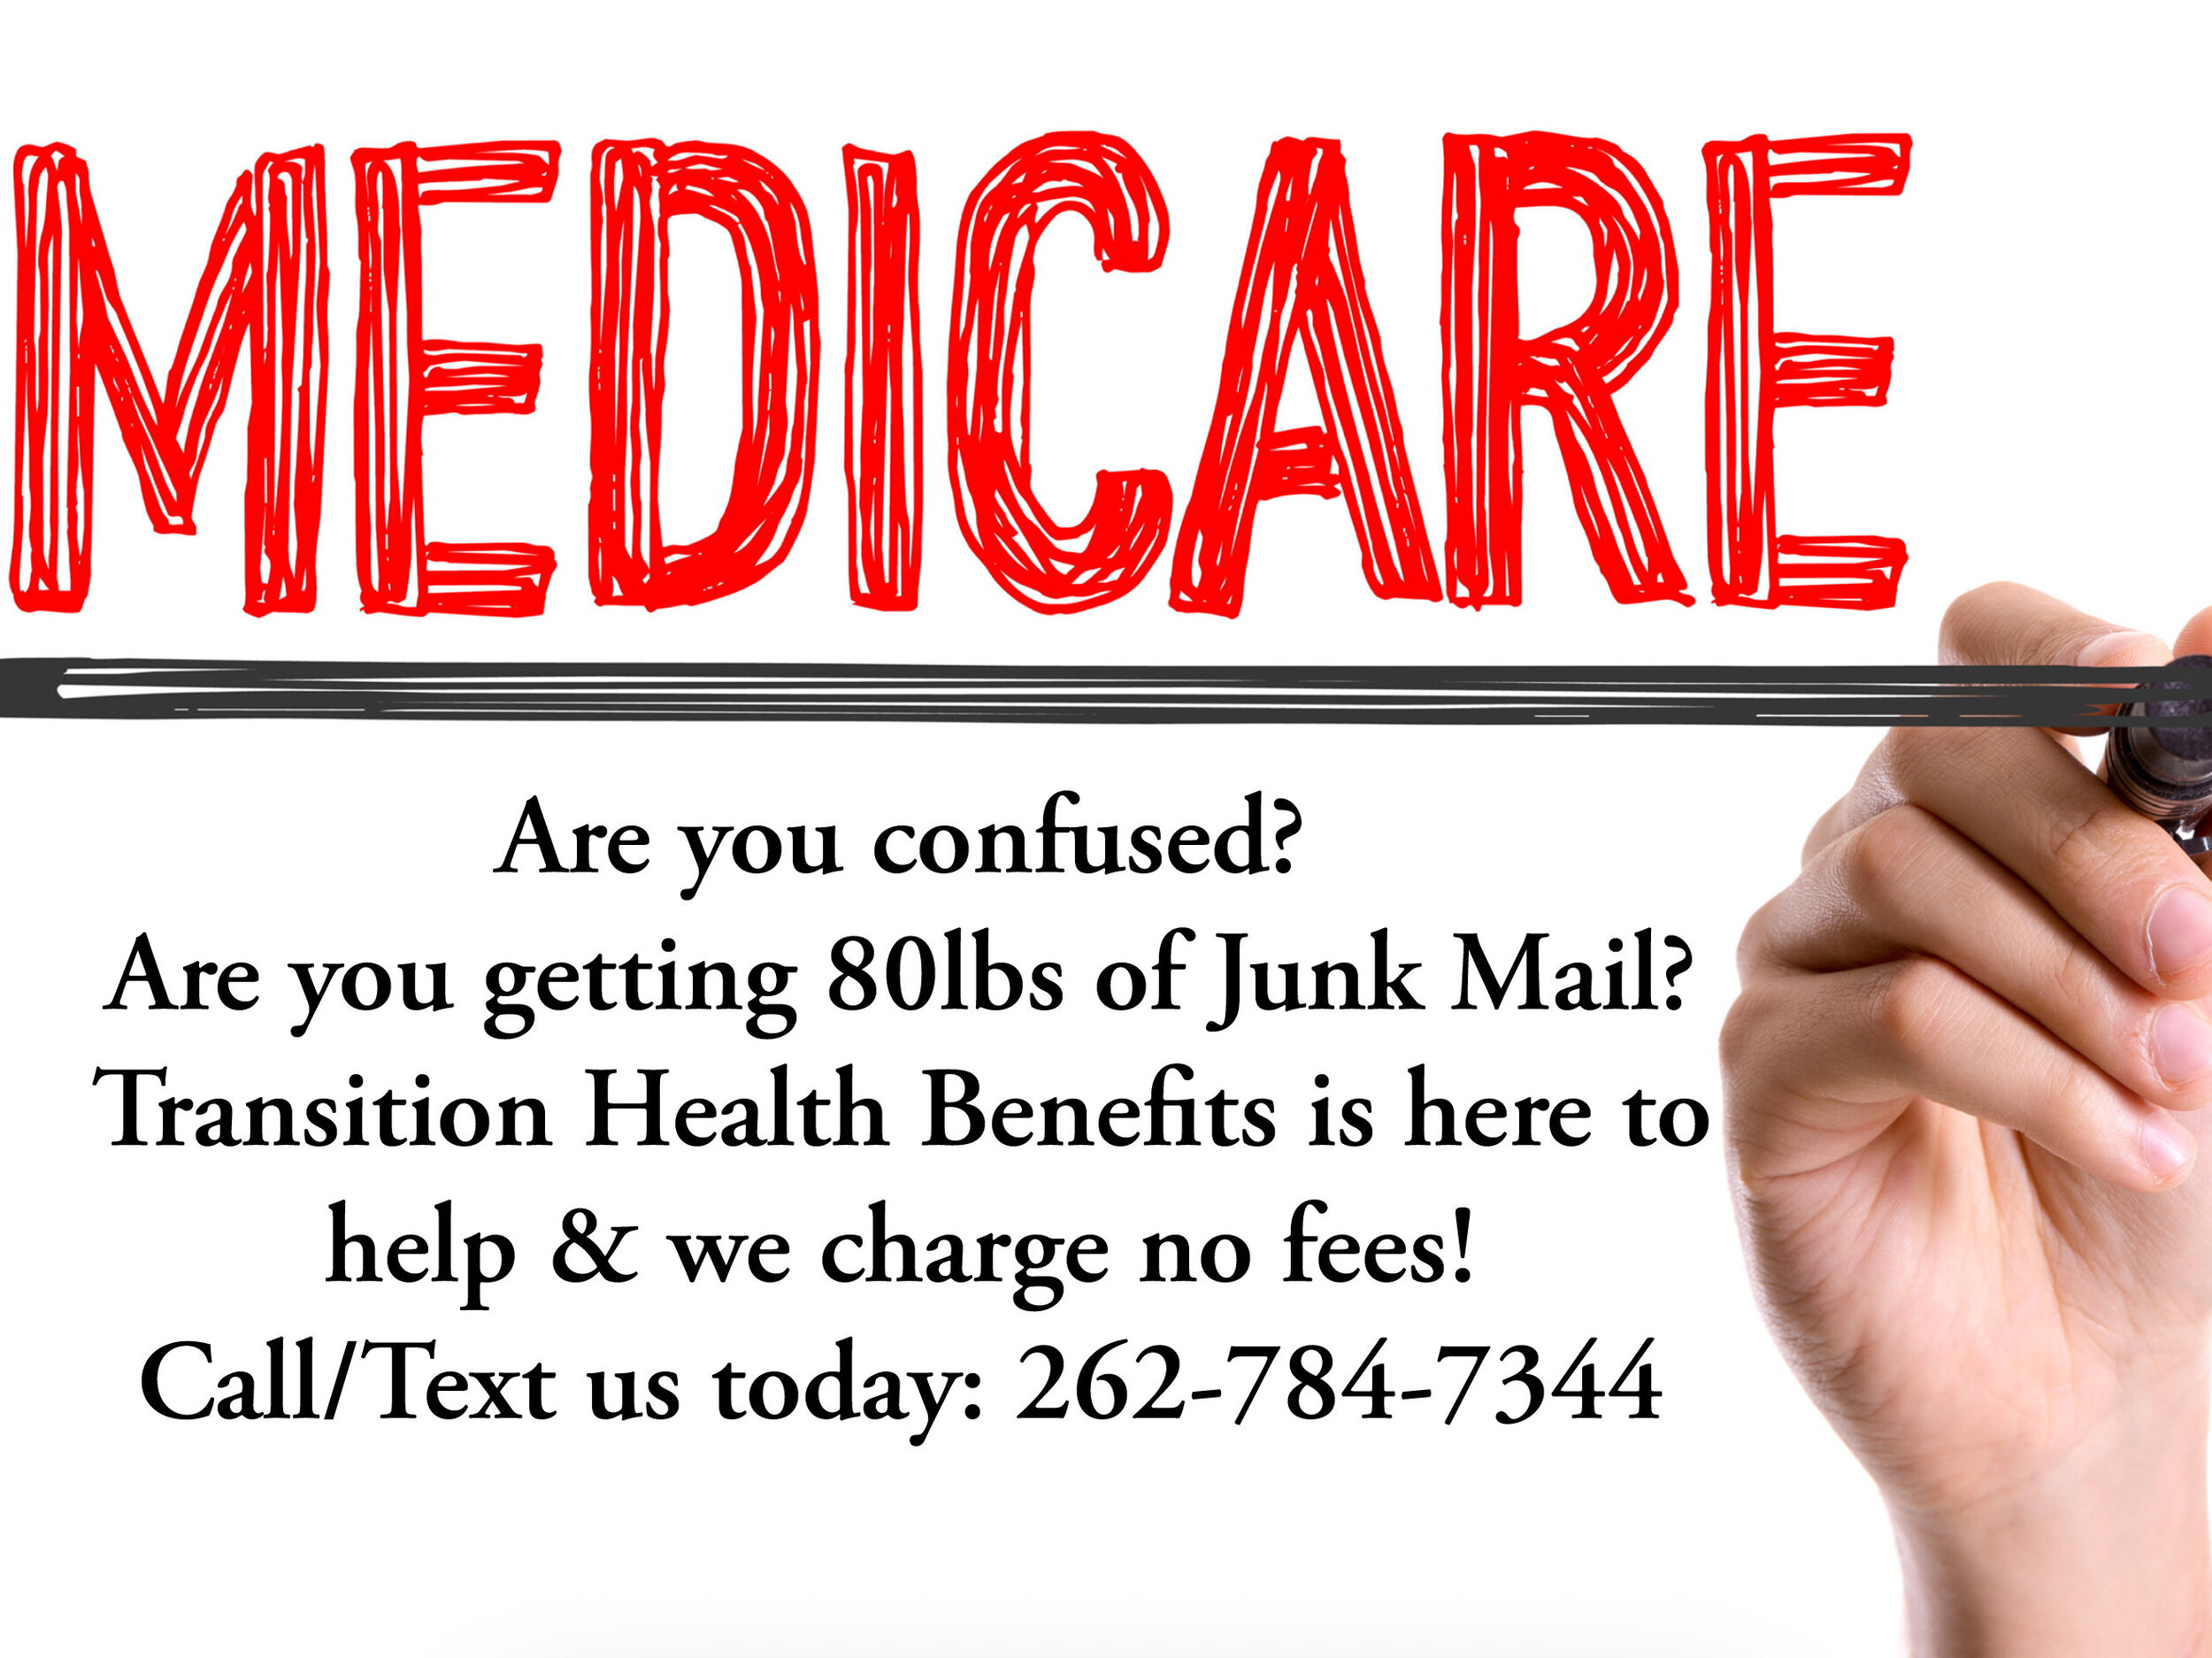 Medicare confused thb can help with phone.jpg